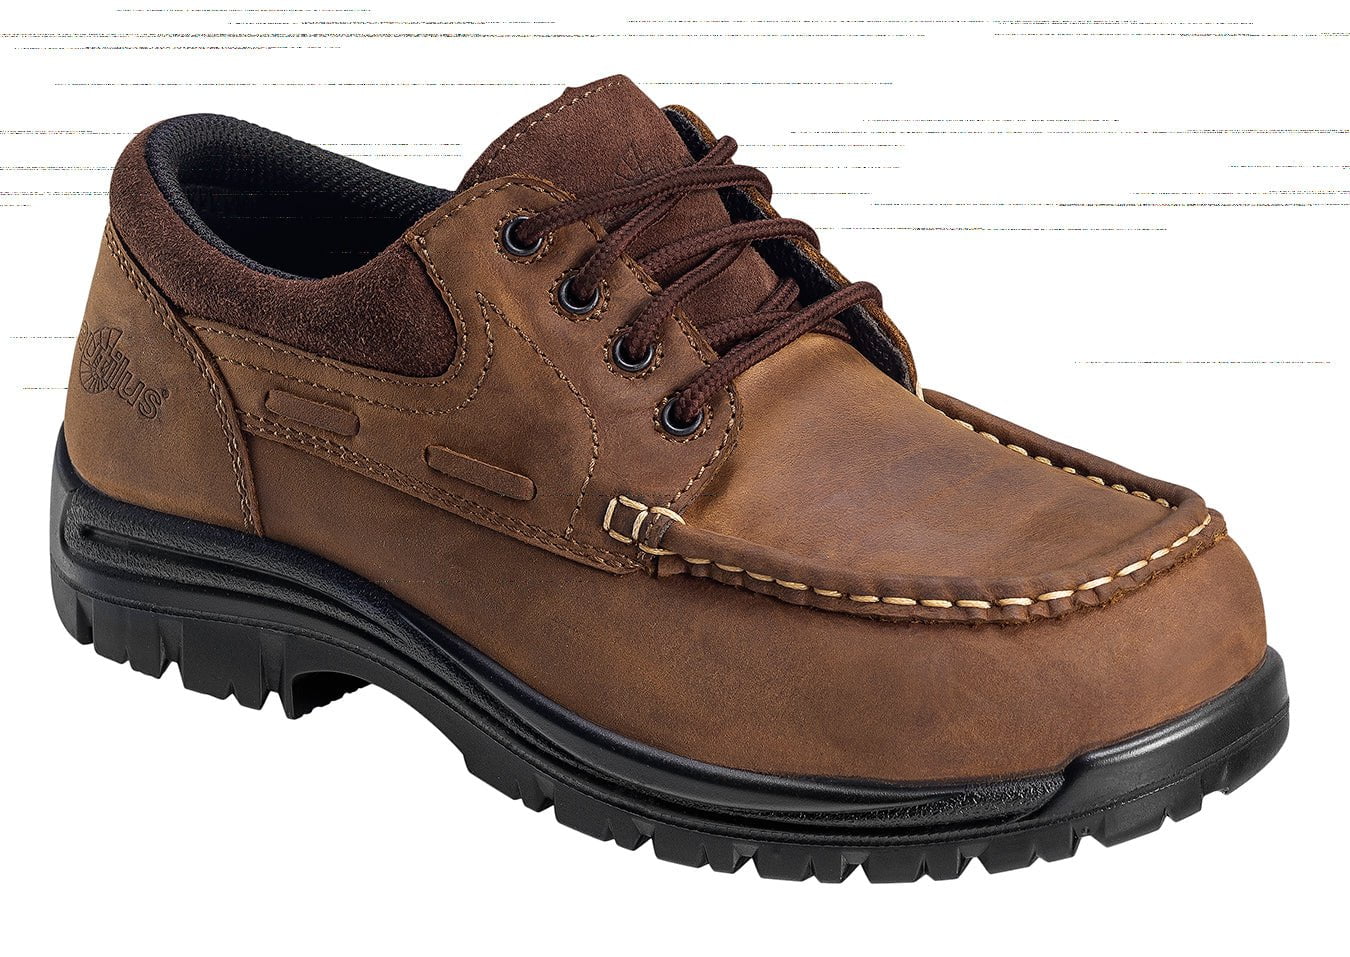 Toe EH ECCO Leather Boat Moc W Brown Shoes – The Western Company